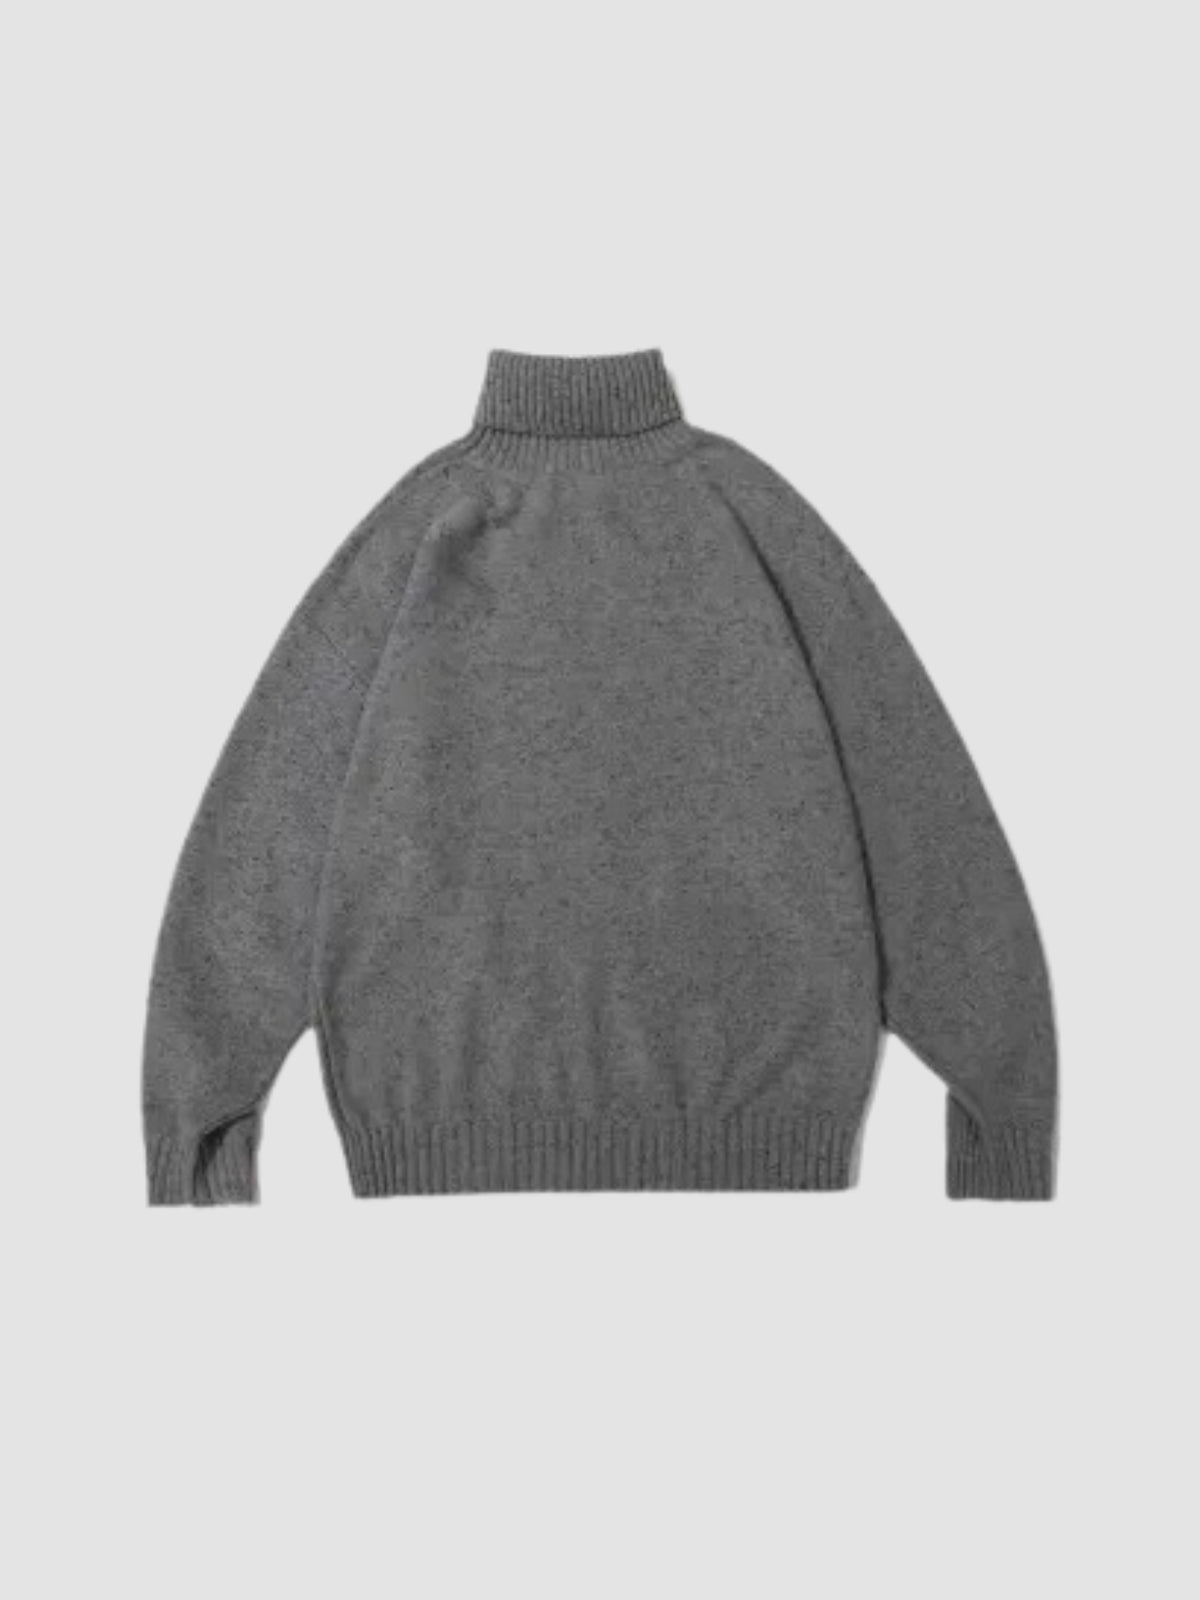 WLS Retro Turtleneck Knitted Sweater Shirt